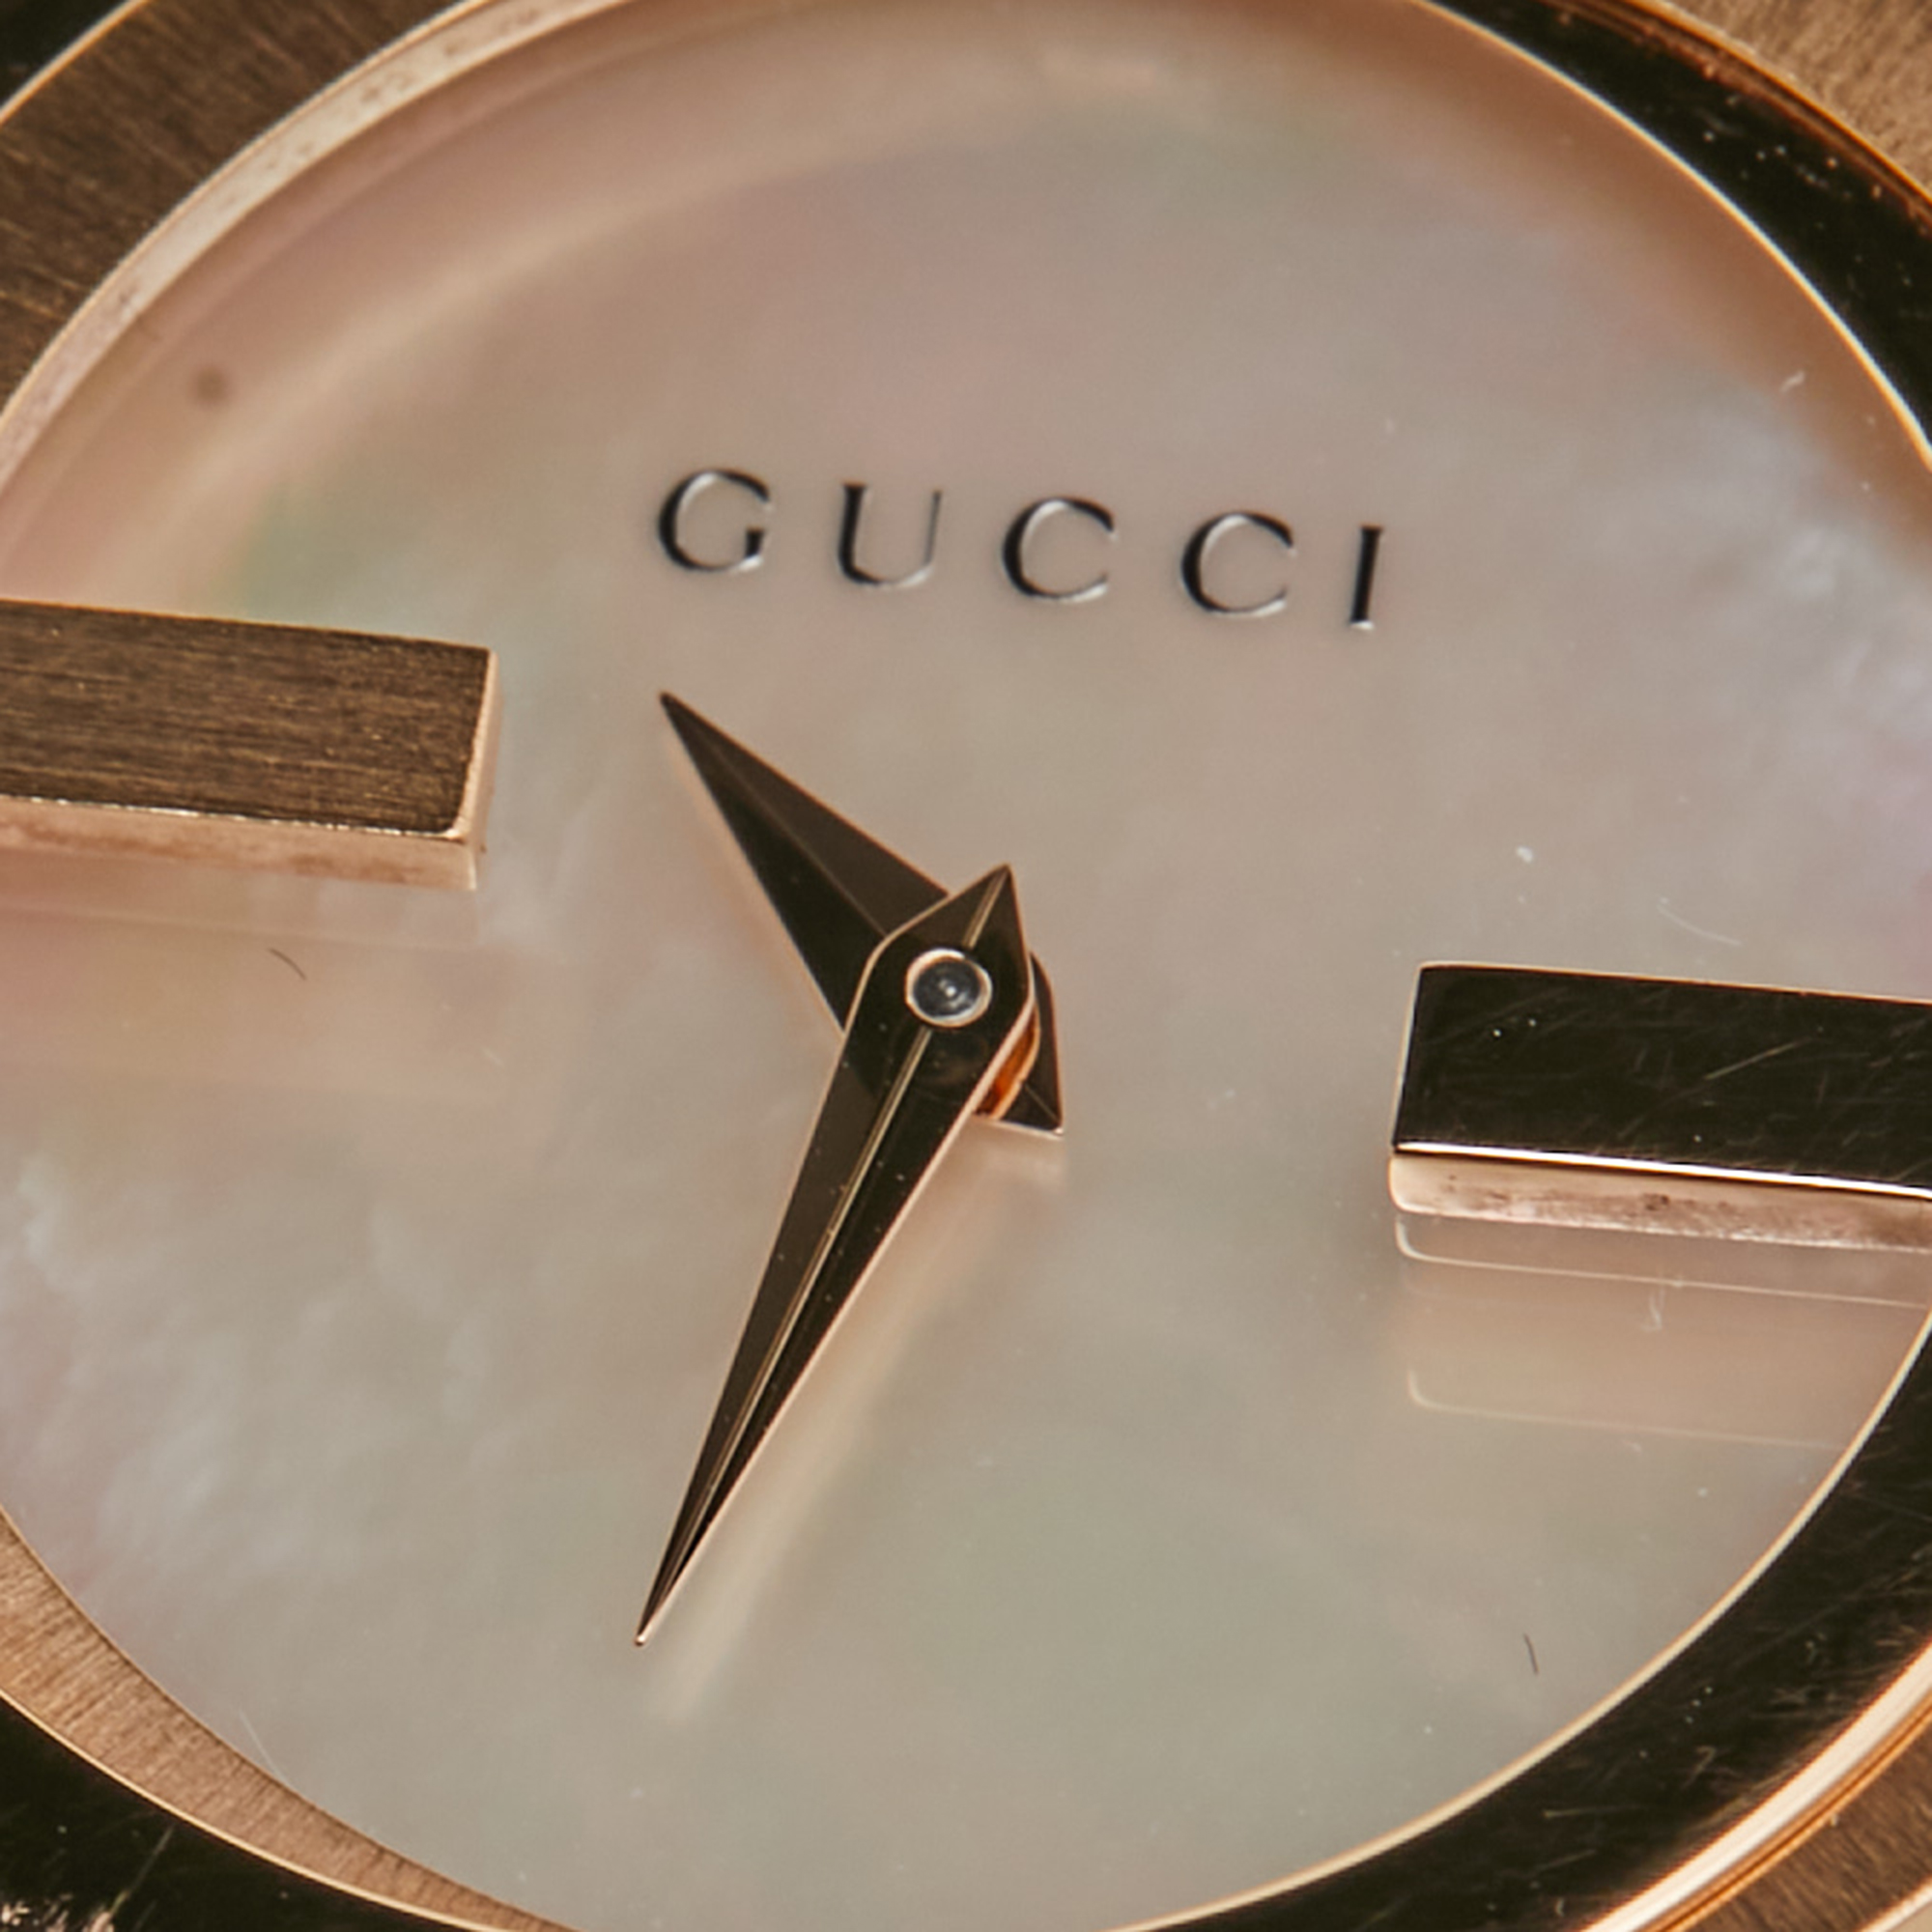 Gucci Mother Of Pearl Rose Gold Tone Stainless Steel Interlocking YA133515 Women's Wristwatch 29 Mm